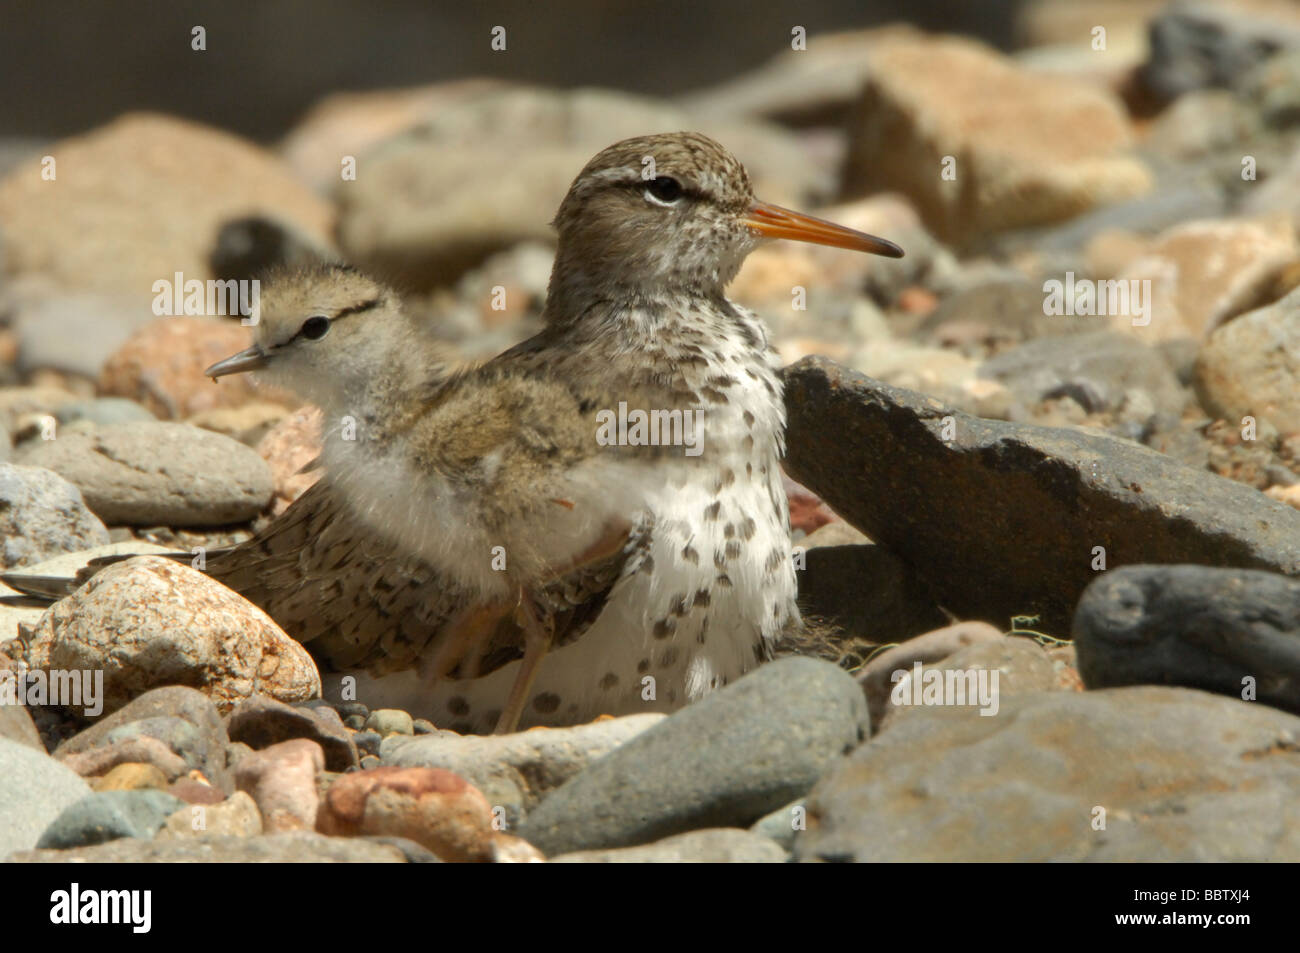 Spotted sandpiper (Actitis macularia) with young chick Stock Photo